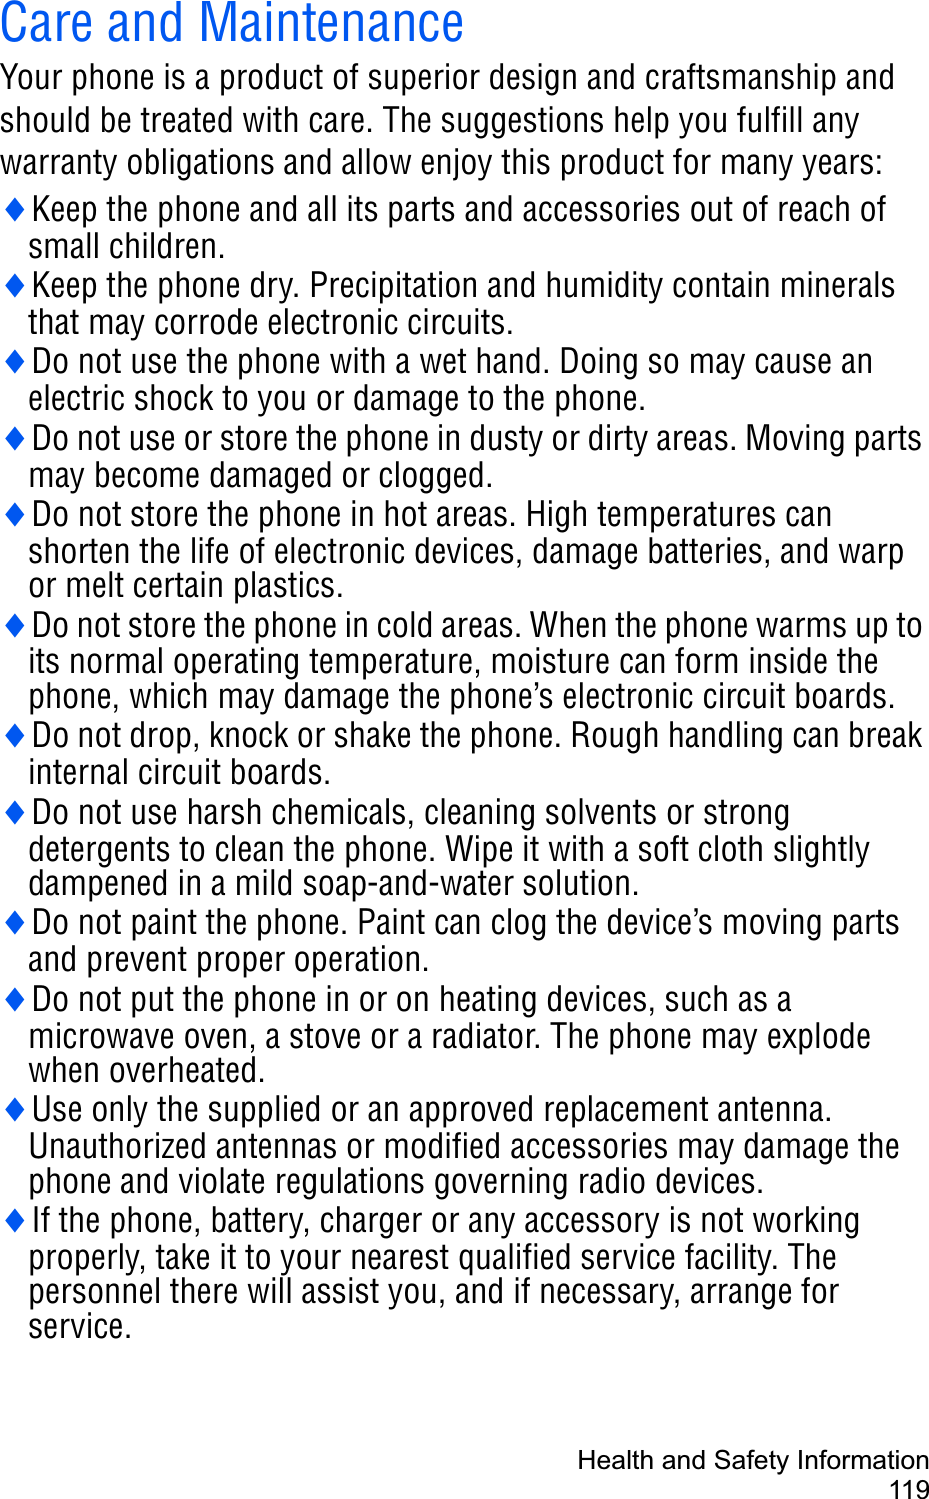 Health and Safety Information119Care and MaintenanceYour phone is a product of superior design and craftsmanship and should be treated with care. The suggestions help you fulfill any warranty obligations and allow enjoy this product for many years:iKeep the phone and all its parts and accessories out of reach of small children.iKeep the phone dry. Precipitation and humidity contain minerals that may corrode electronic circuits.iDo not use the phone with a wet hand. Doing so may cause an electric shock to you or damage to the phone.iDo not use or store the phone in dusty or dirty areas. Moving parts may become damaged or clogged.iDo not store the phone in hot areas. High temperatures can shorten the life of electronic devices, damage batteries, and warp or melt certain plastics.iDo not store the phone in cold areas. When the phone warms up to its normal operating temperature, moisture can form inside the phone, which may damage the phone’s electronic circuit boards.iDo not drop, knock or shake the phone. Rough handling can break internal circuit boards.iDo not use harsh chemicals, cleaning solvents or strong detergents to clean the phone. Wipe it with a soft cloth slightly dampened in a mild soap-and-water solution.iDo not paint the phone. Paint can clog the device’s moving parts and prevent proper operation.iDo not put the phone in or on heating devices, such as a microwave oven, a stove or a radiator. The phone may explode when overheated.iUse only the supplied or an approved replacement antenna. Unauthorized antennas or modified accessories may damage the phone and violate regulations governing radio devices.iIf the phone, battery, charger or any accessory is not working properly, take it to your nearest qualified service facility. The personnel there will assist you, and if necessary, arrange for service.